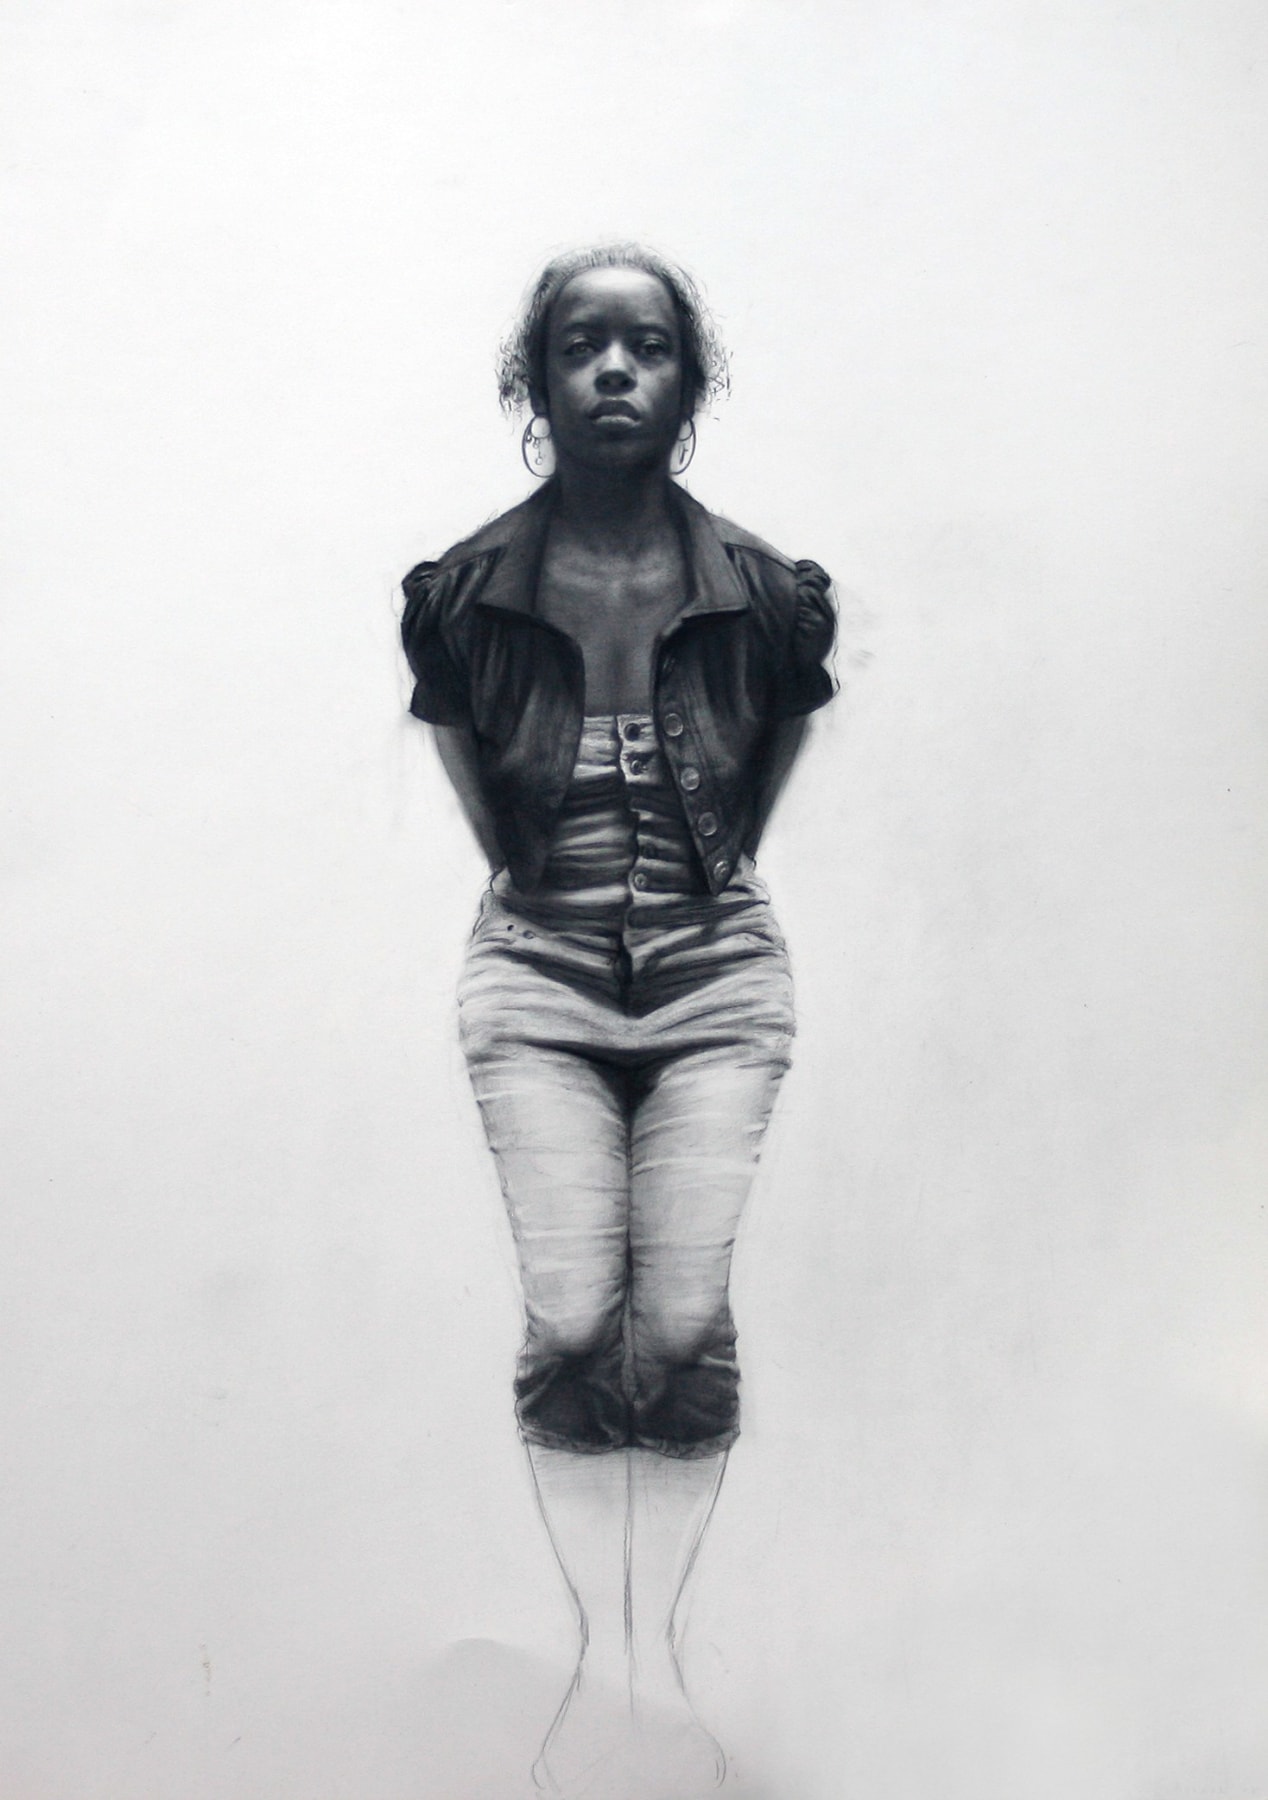 Steven Assael, Hands Behind Back (SOLD), 2008, crayon and graphite on paper, 23 x 16 3/8 inches